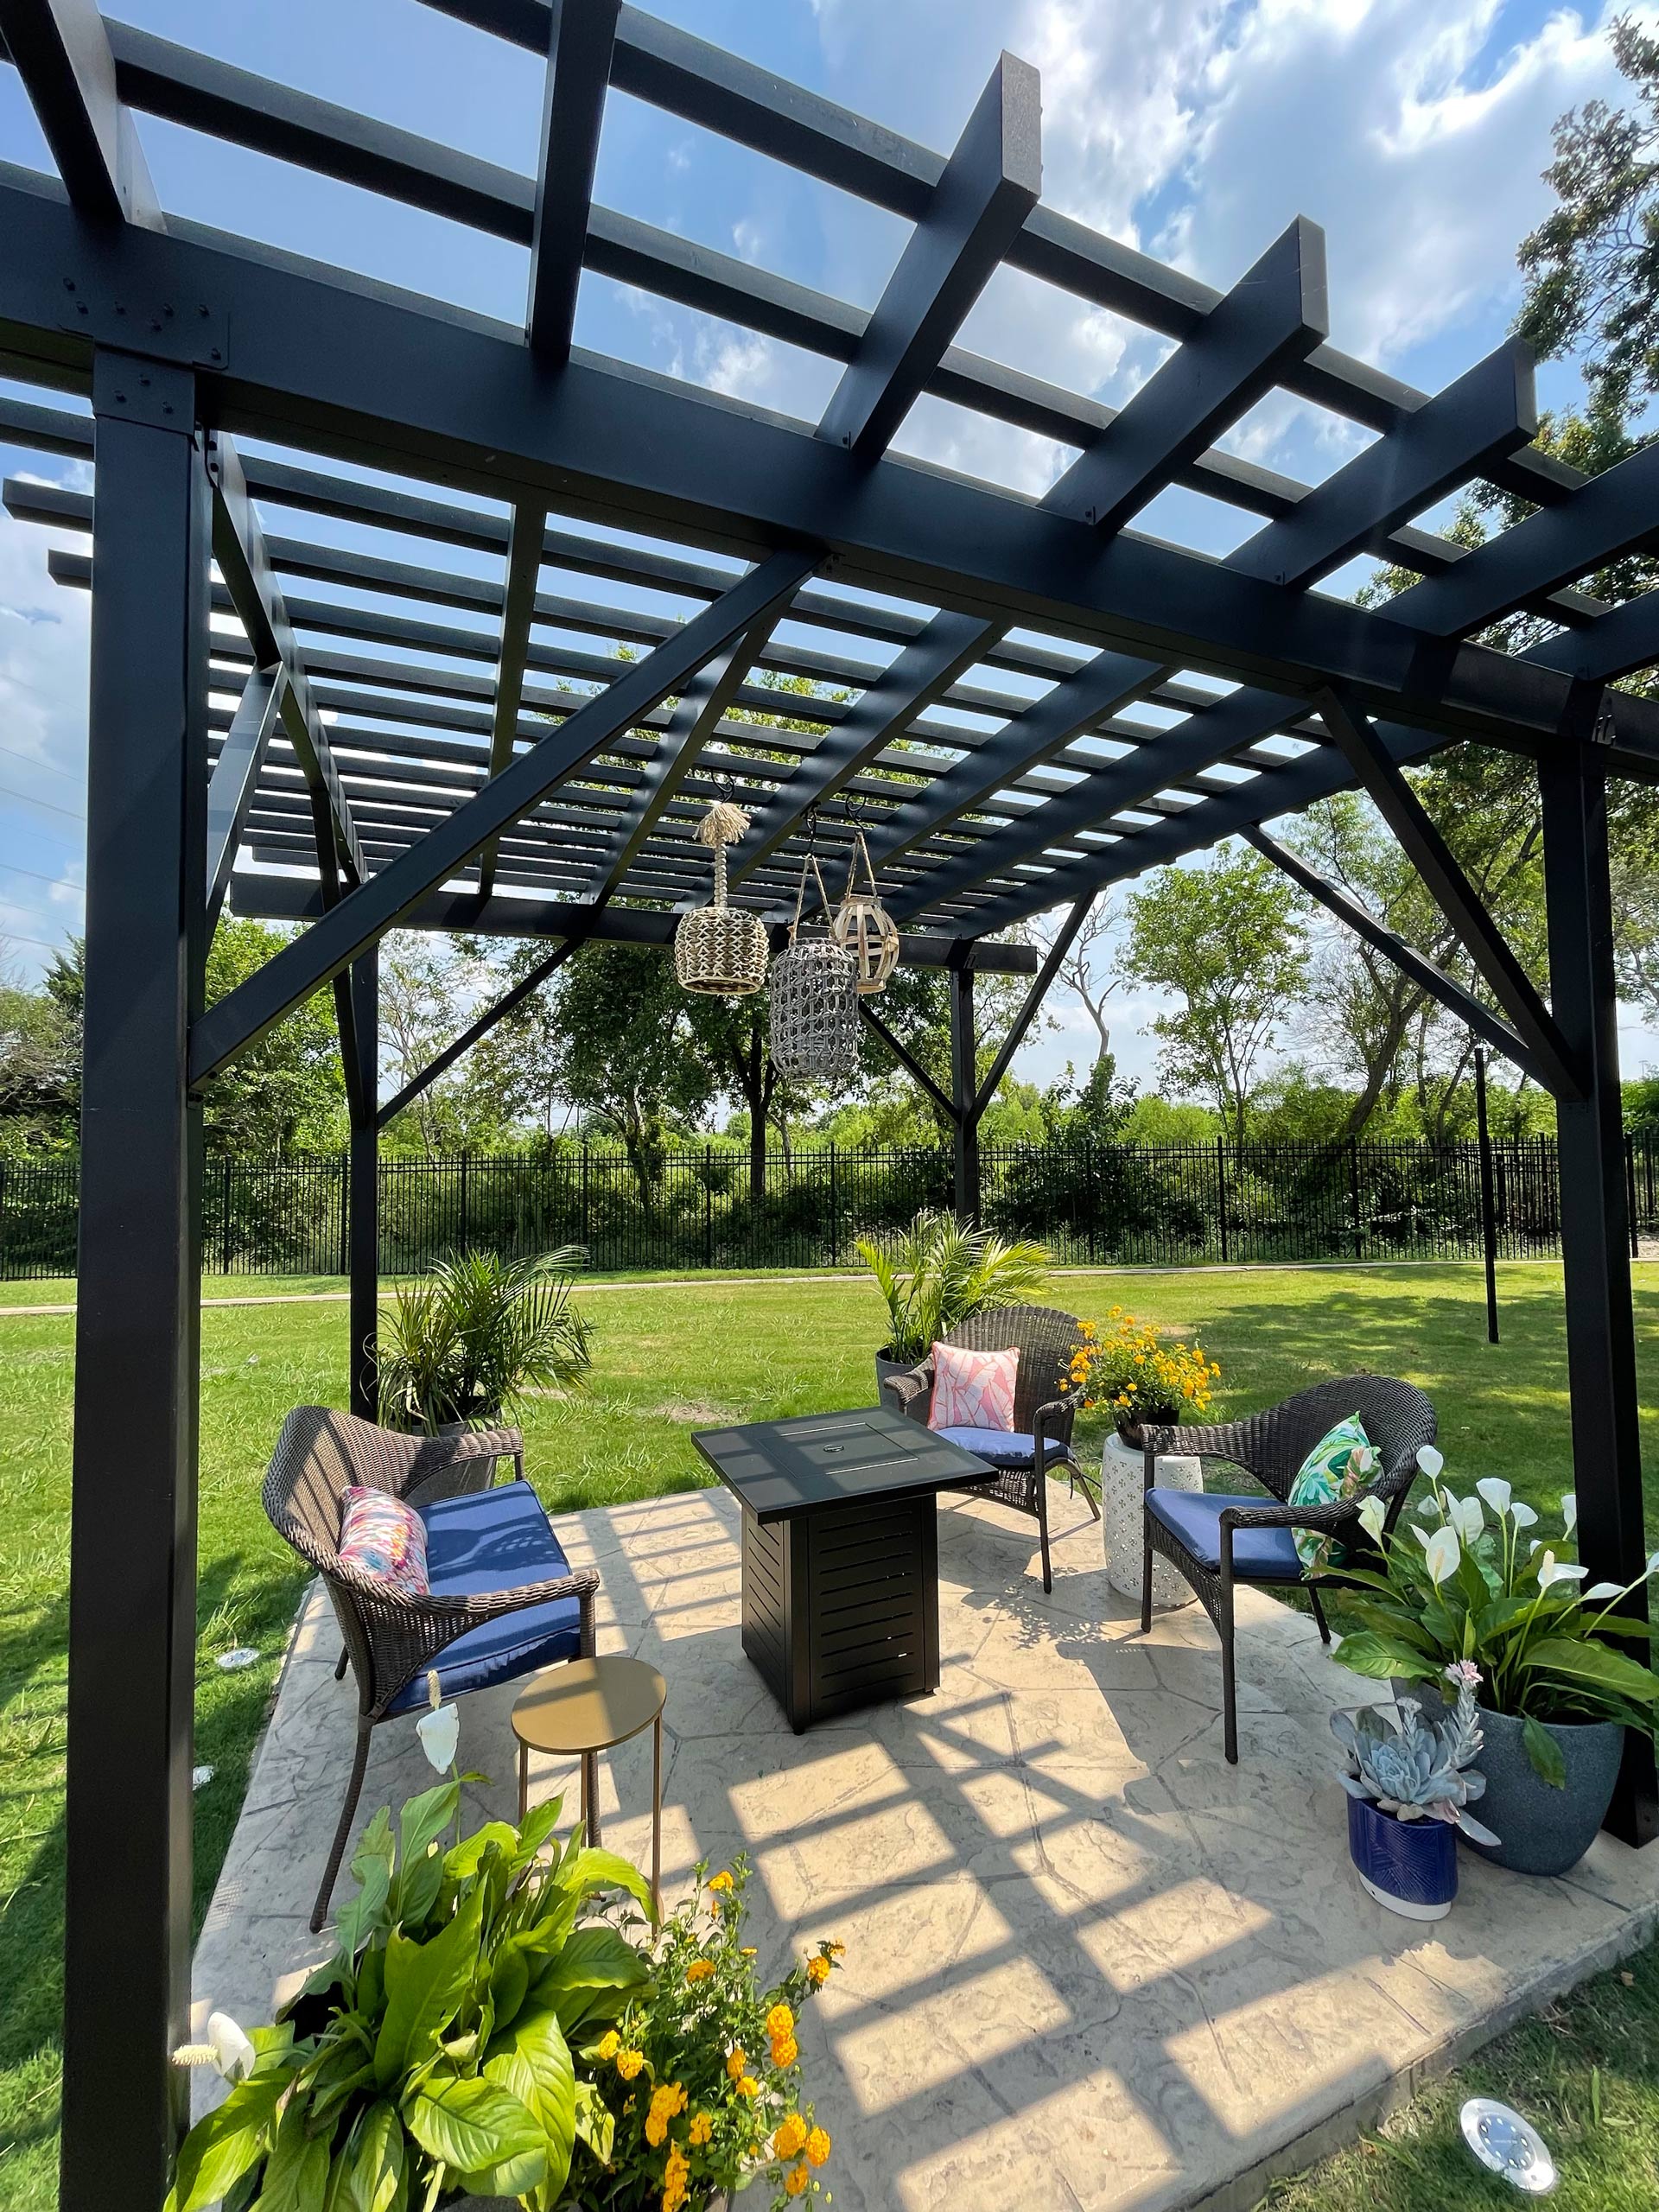 Backyard living space created with an overhead steel pergola complete with chairs and plants.